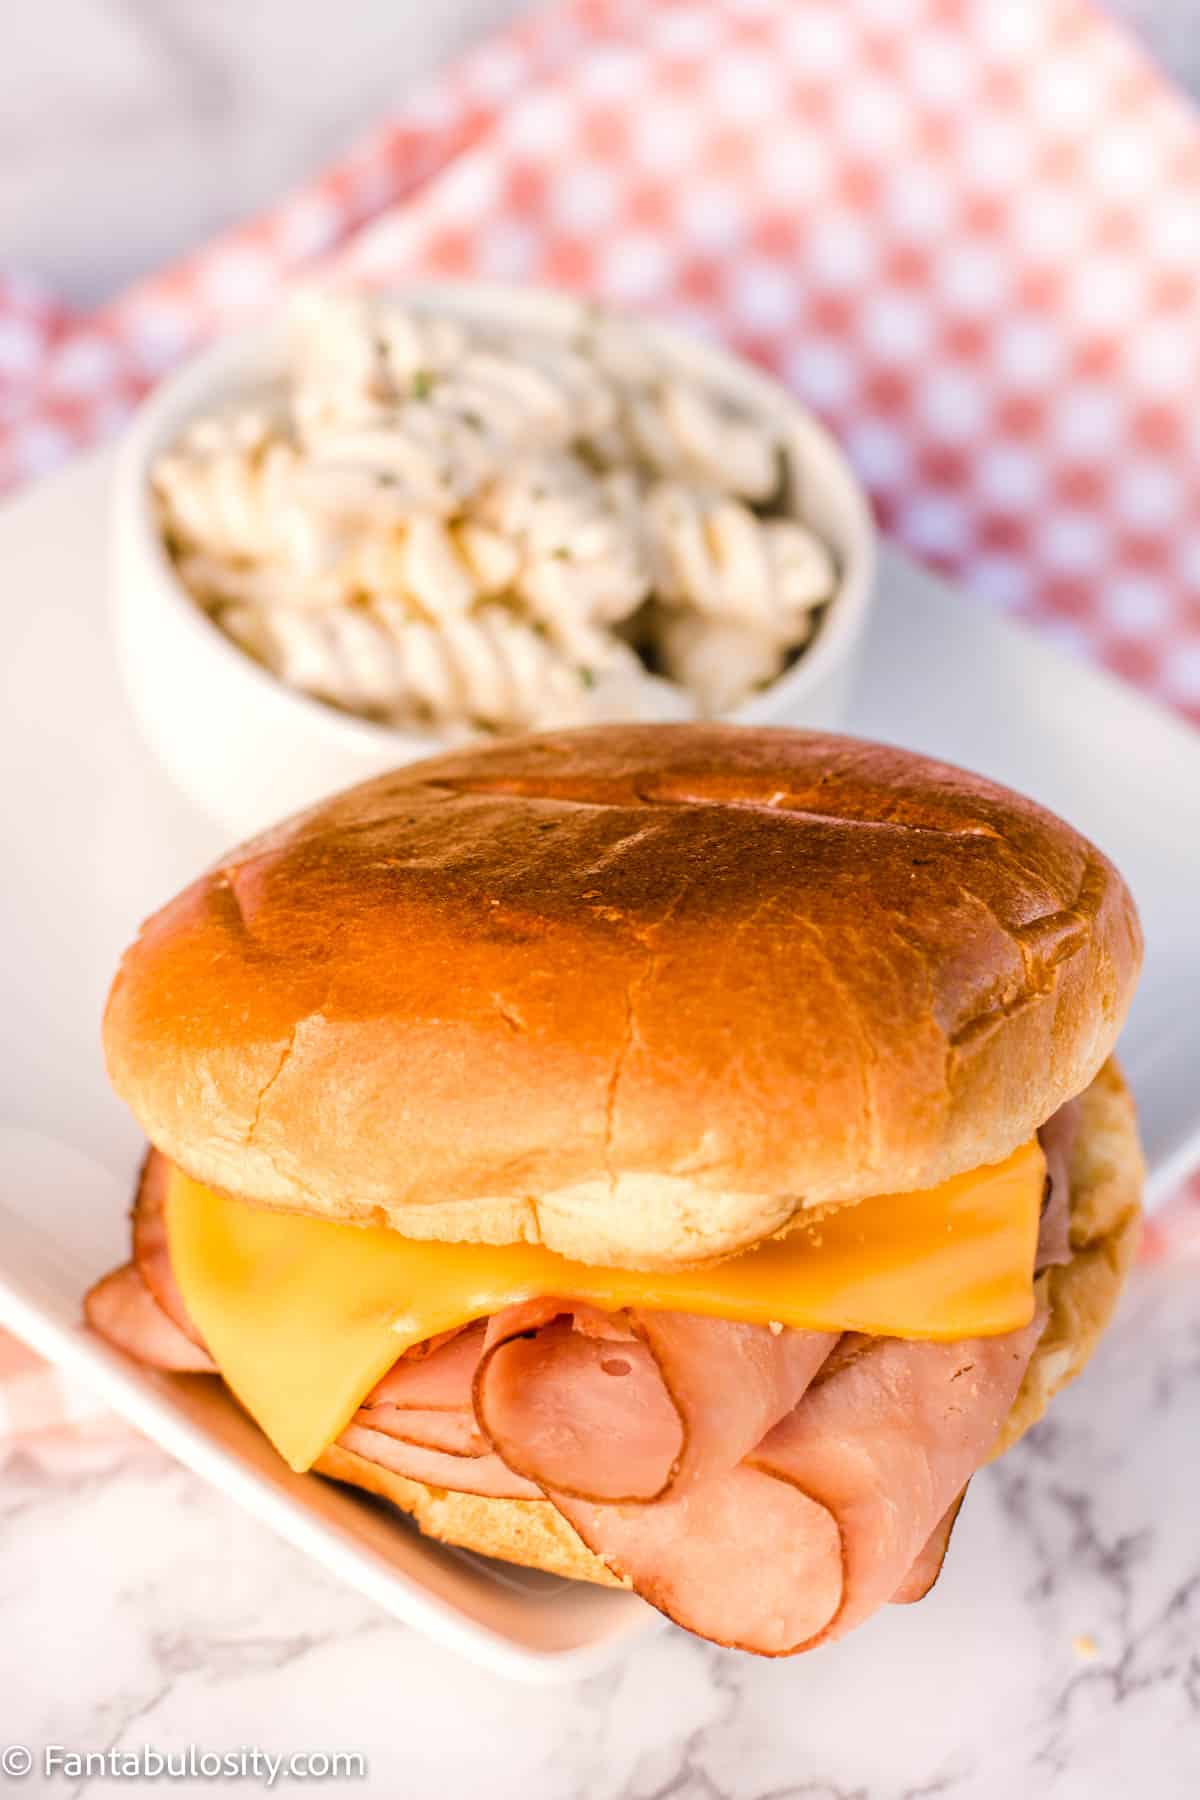 Hot ham and cheese sandwich on white plate next to pasta salad